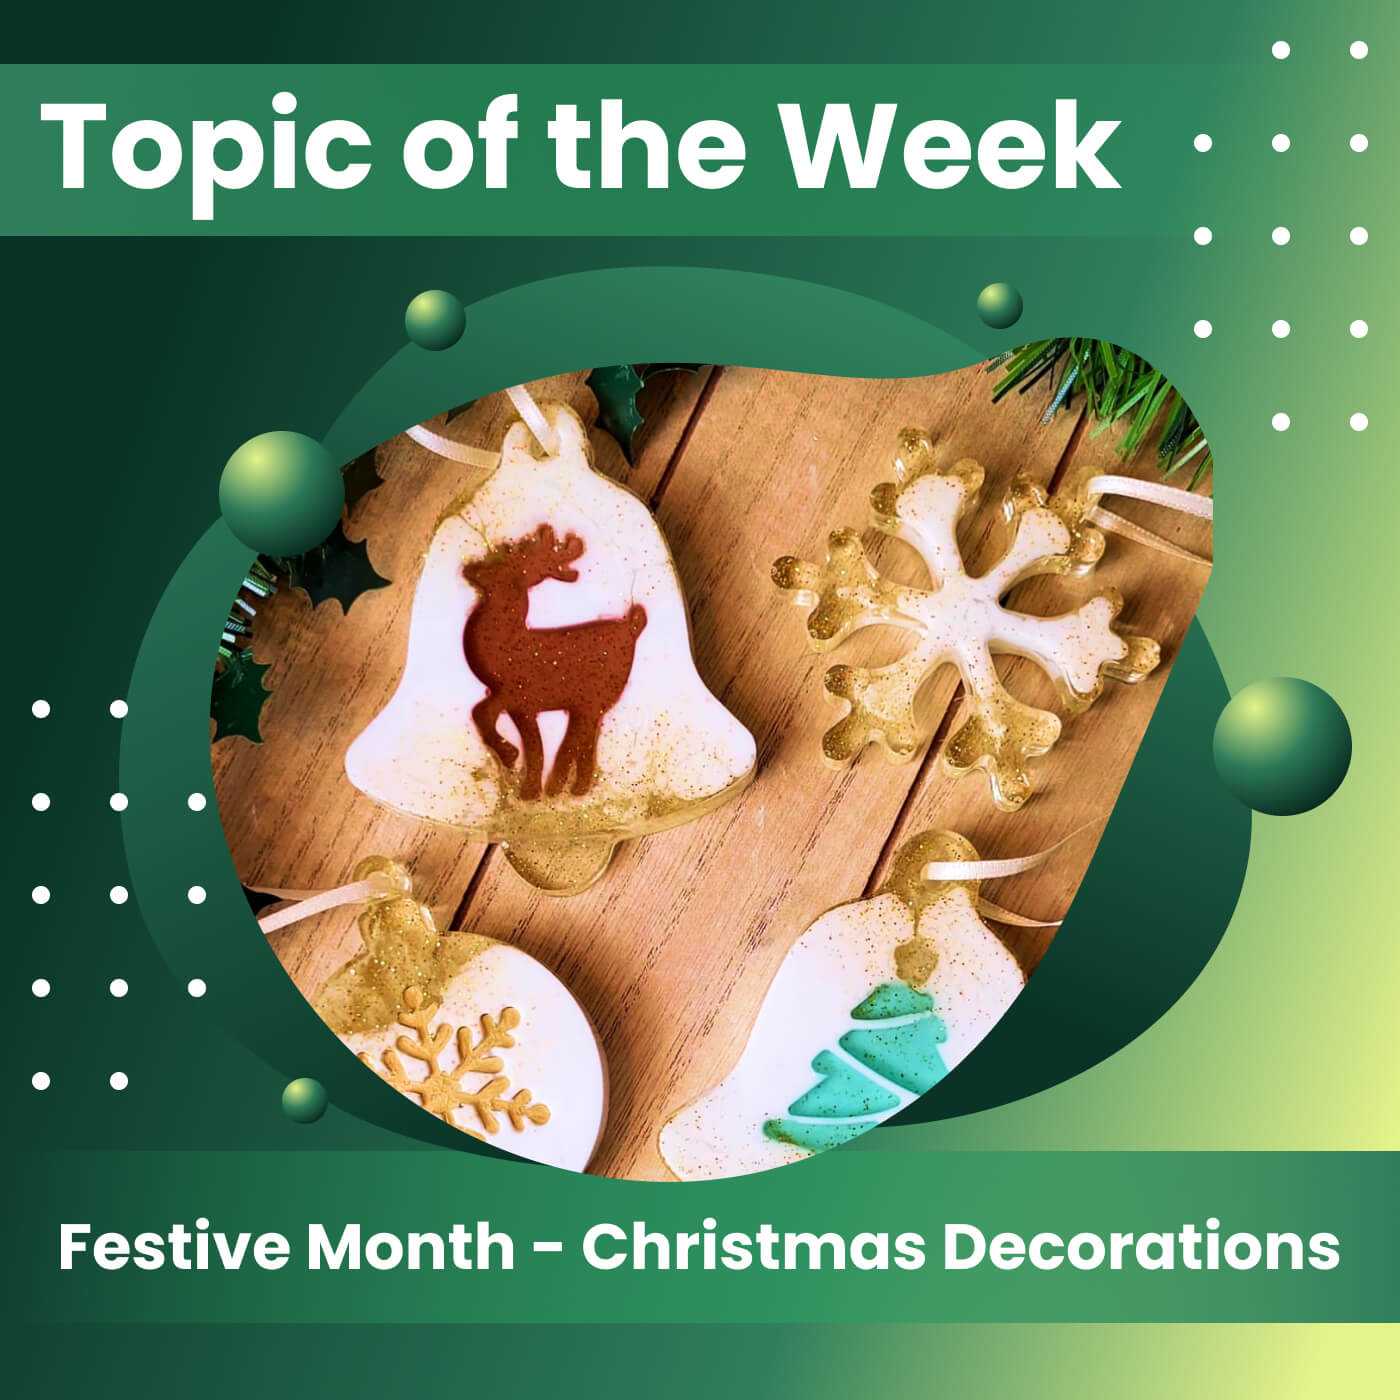 Festive Month - Christmas Decorations - Craft Resin